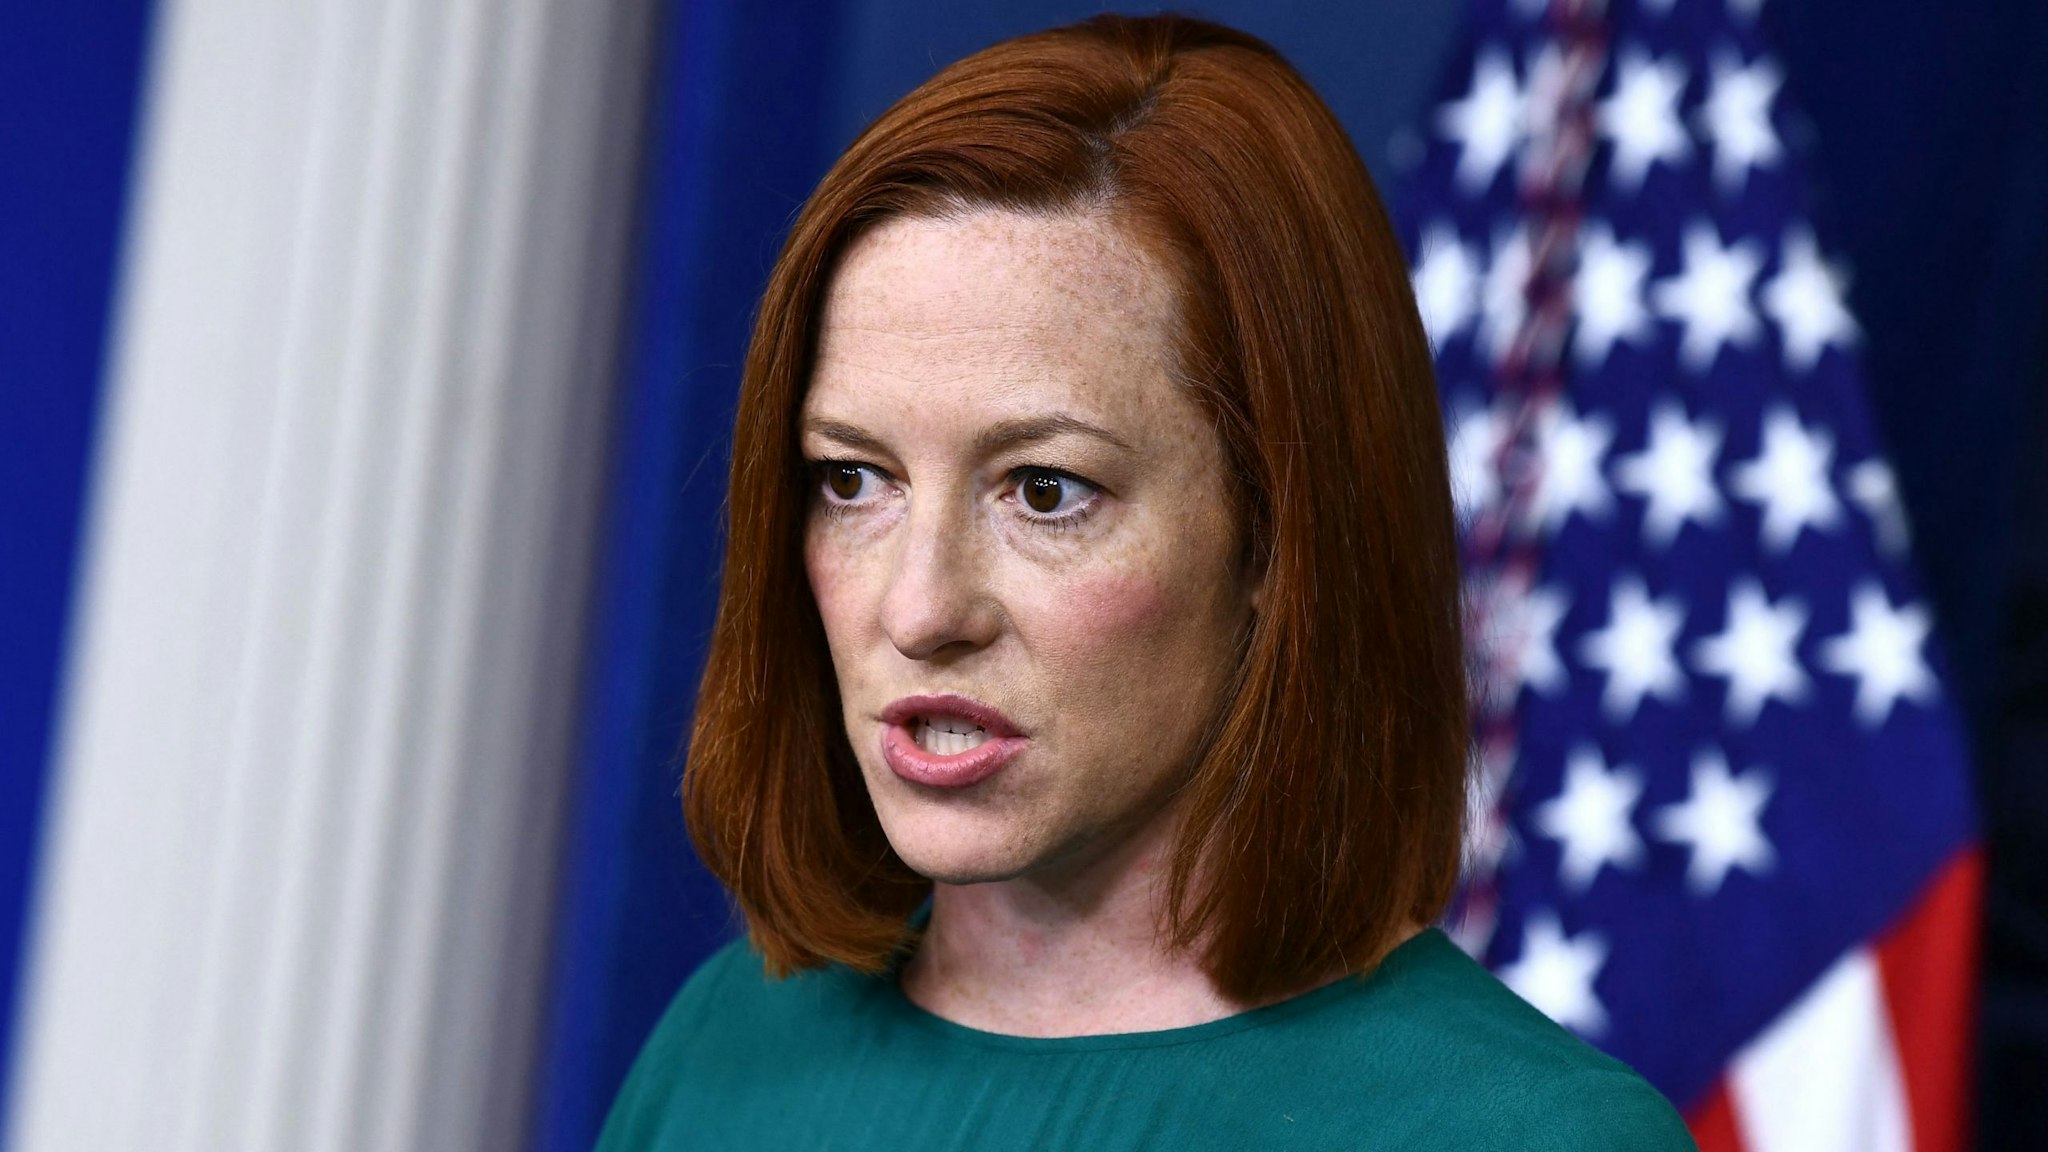 White House Press Secretary Jen Psaki speaks during the daily press briefing on April 6, 2021, in the Brady Briefing Room of the White House in Washington, DC.